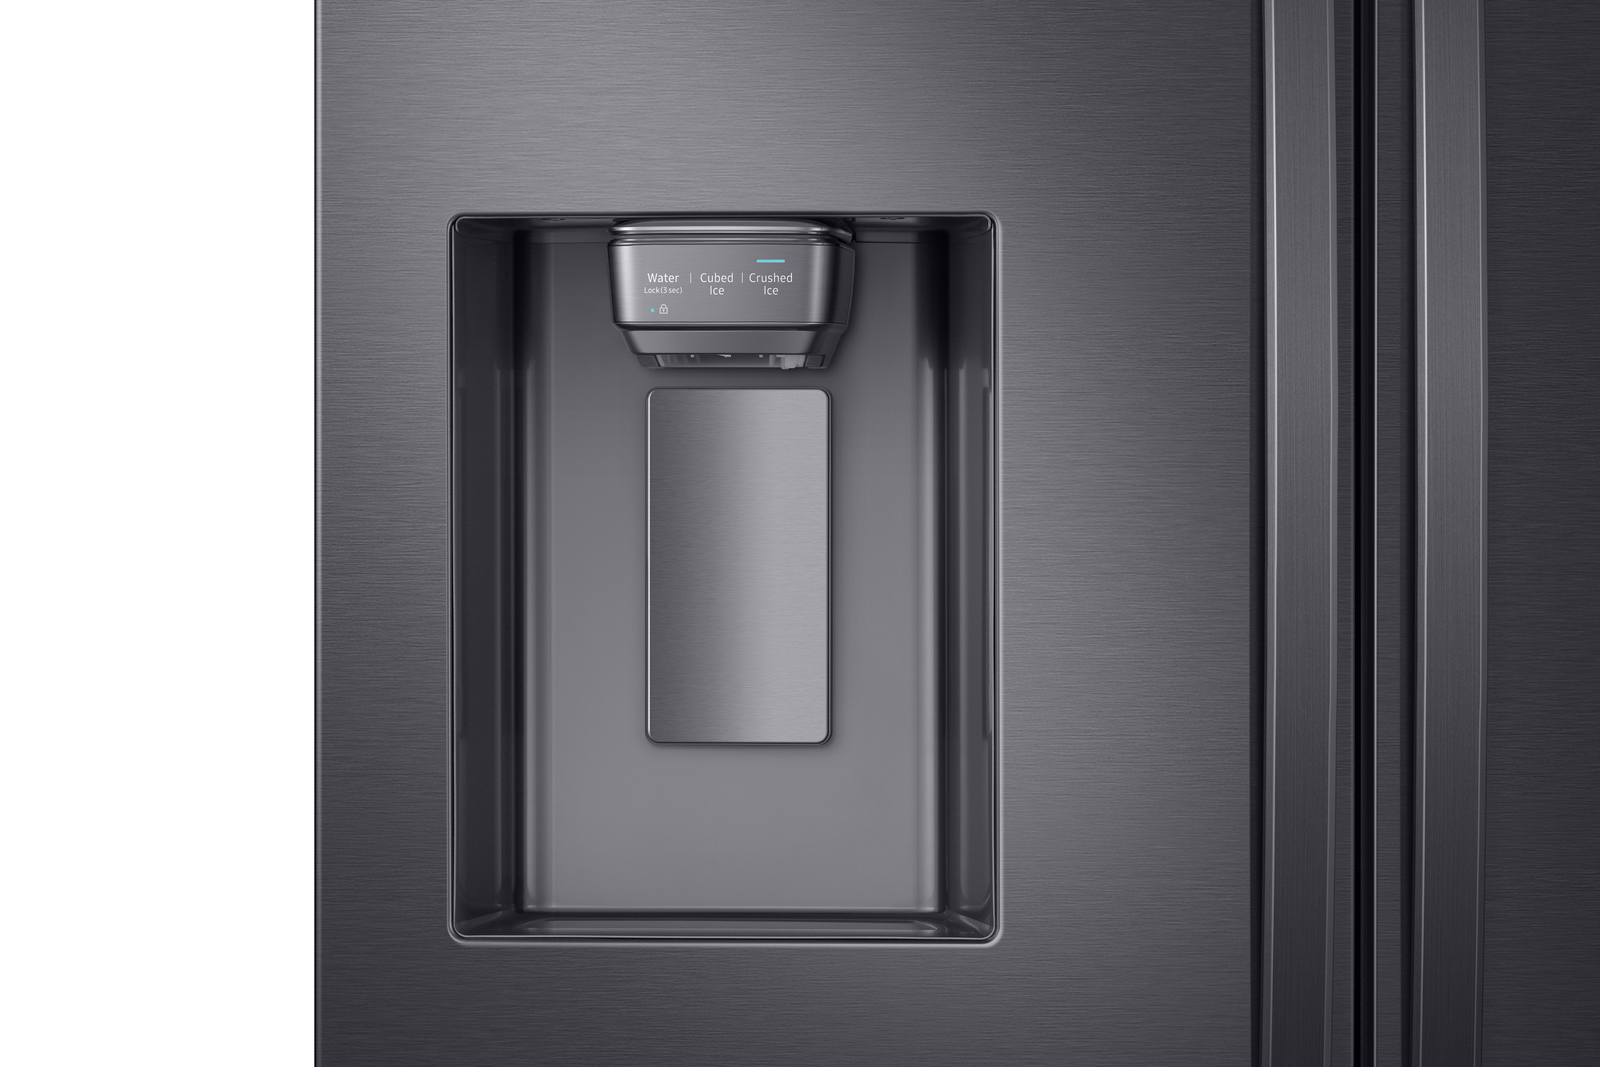 Thumbnail image of 28 cu. ft. 3-Door French Door, Full Depth Refrigerator with CoolSelect Pantry&trade; in Black Stainless Steel